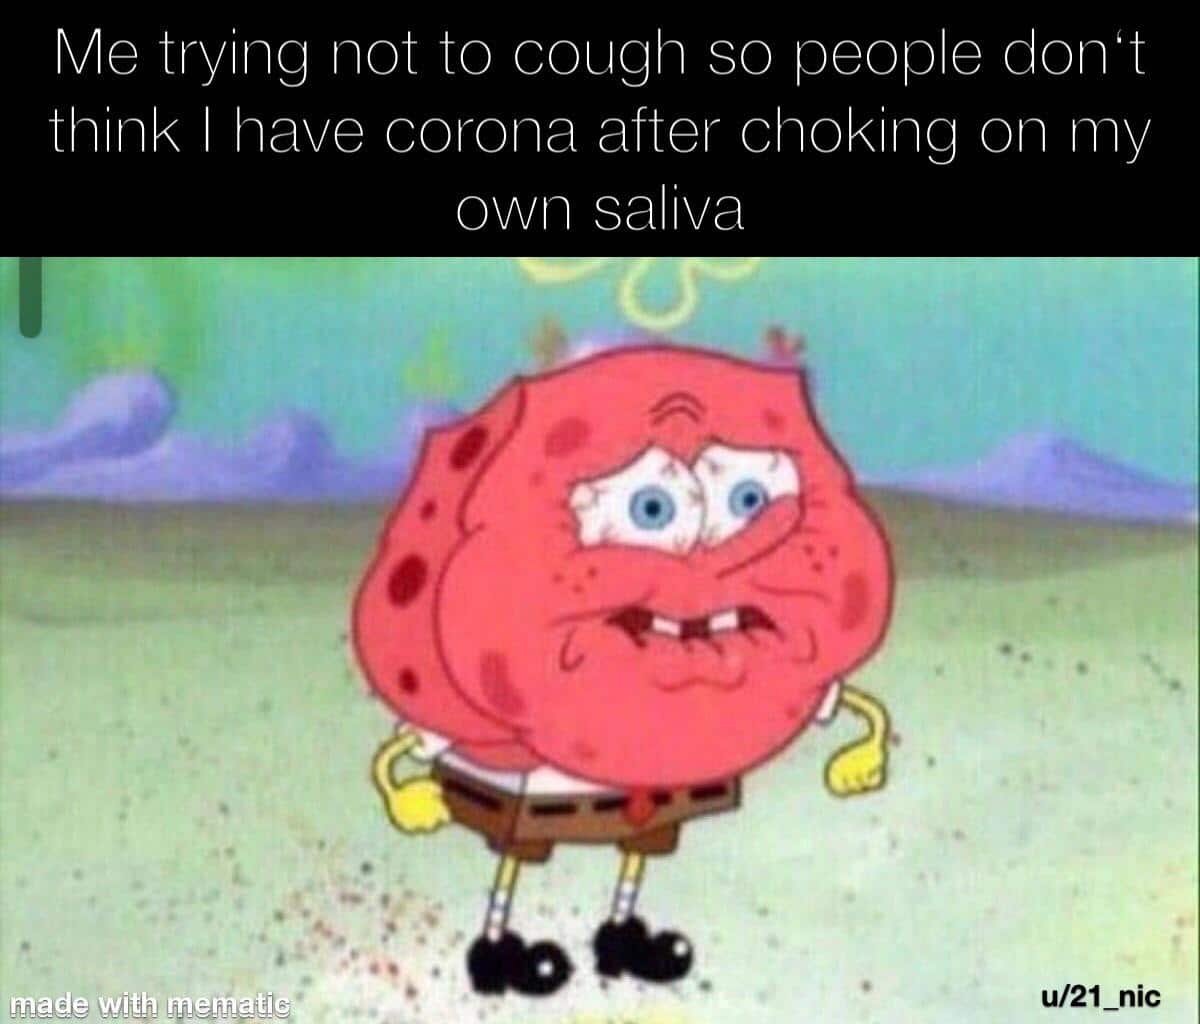 Funny, Walmart, Cake Day, Asian other memes Funny, Walmart, Cake Day, Asian text: Me try ng not to cough so people don't th nk I have corona after choking on my own saliva made' u/21_nic 